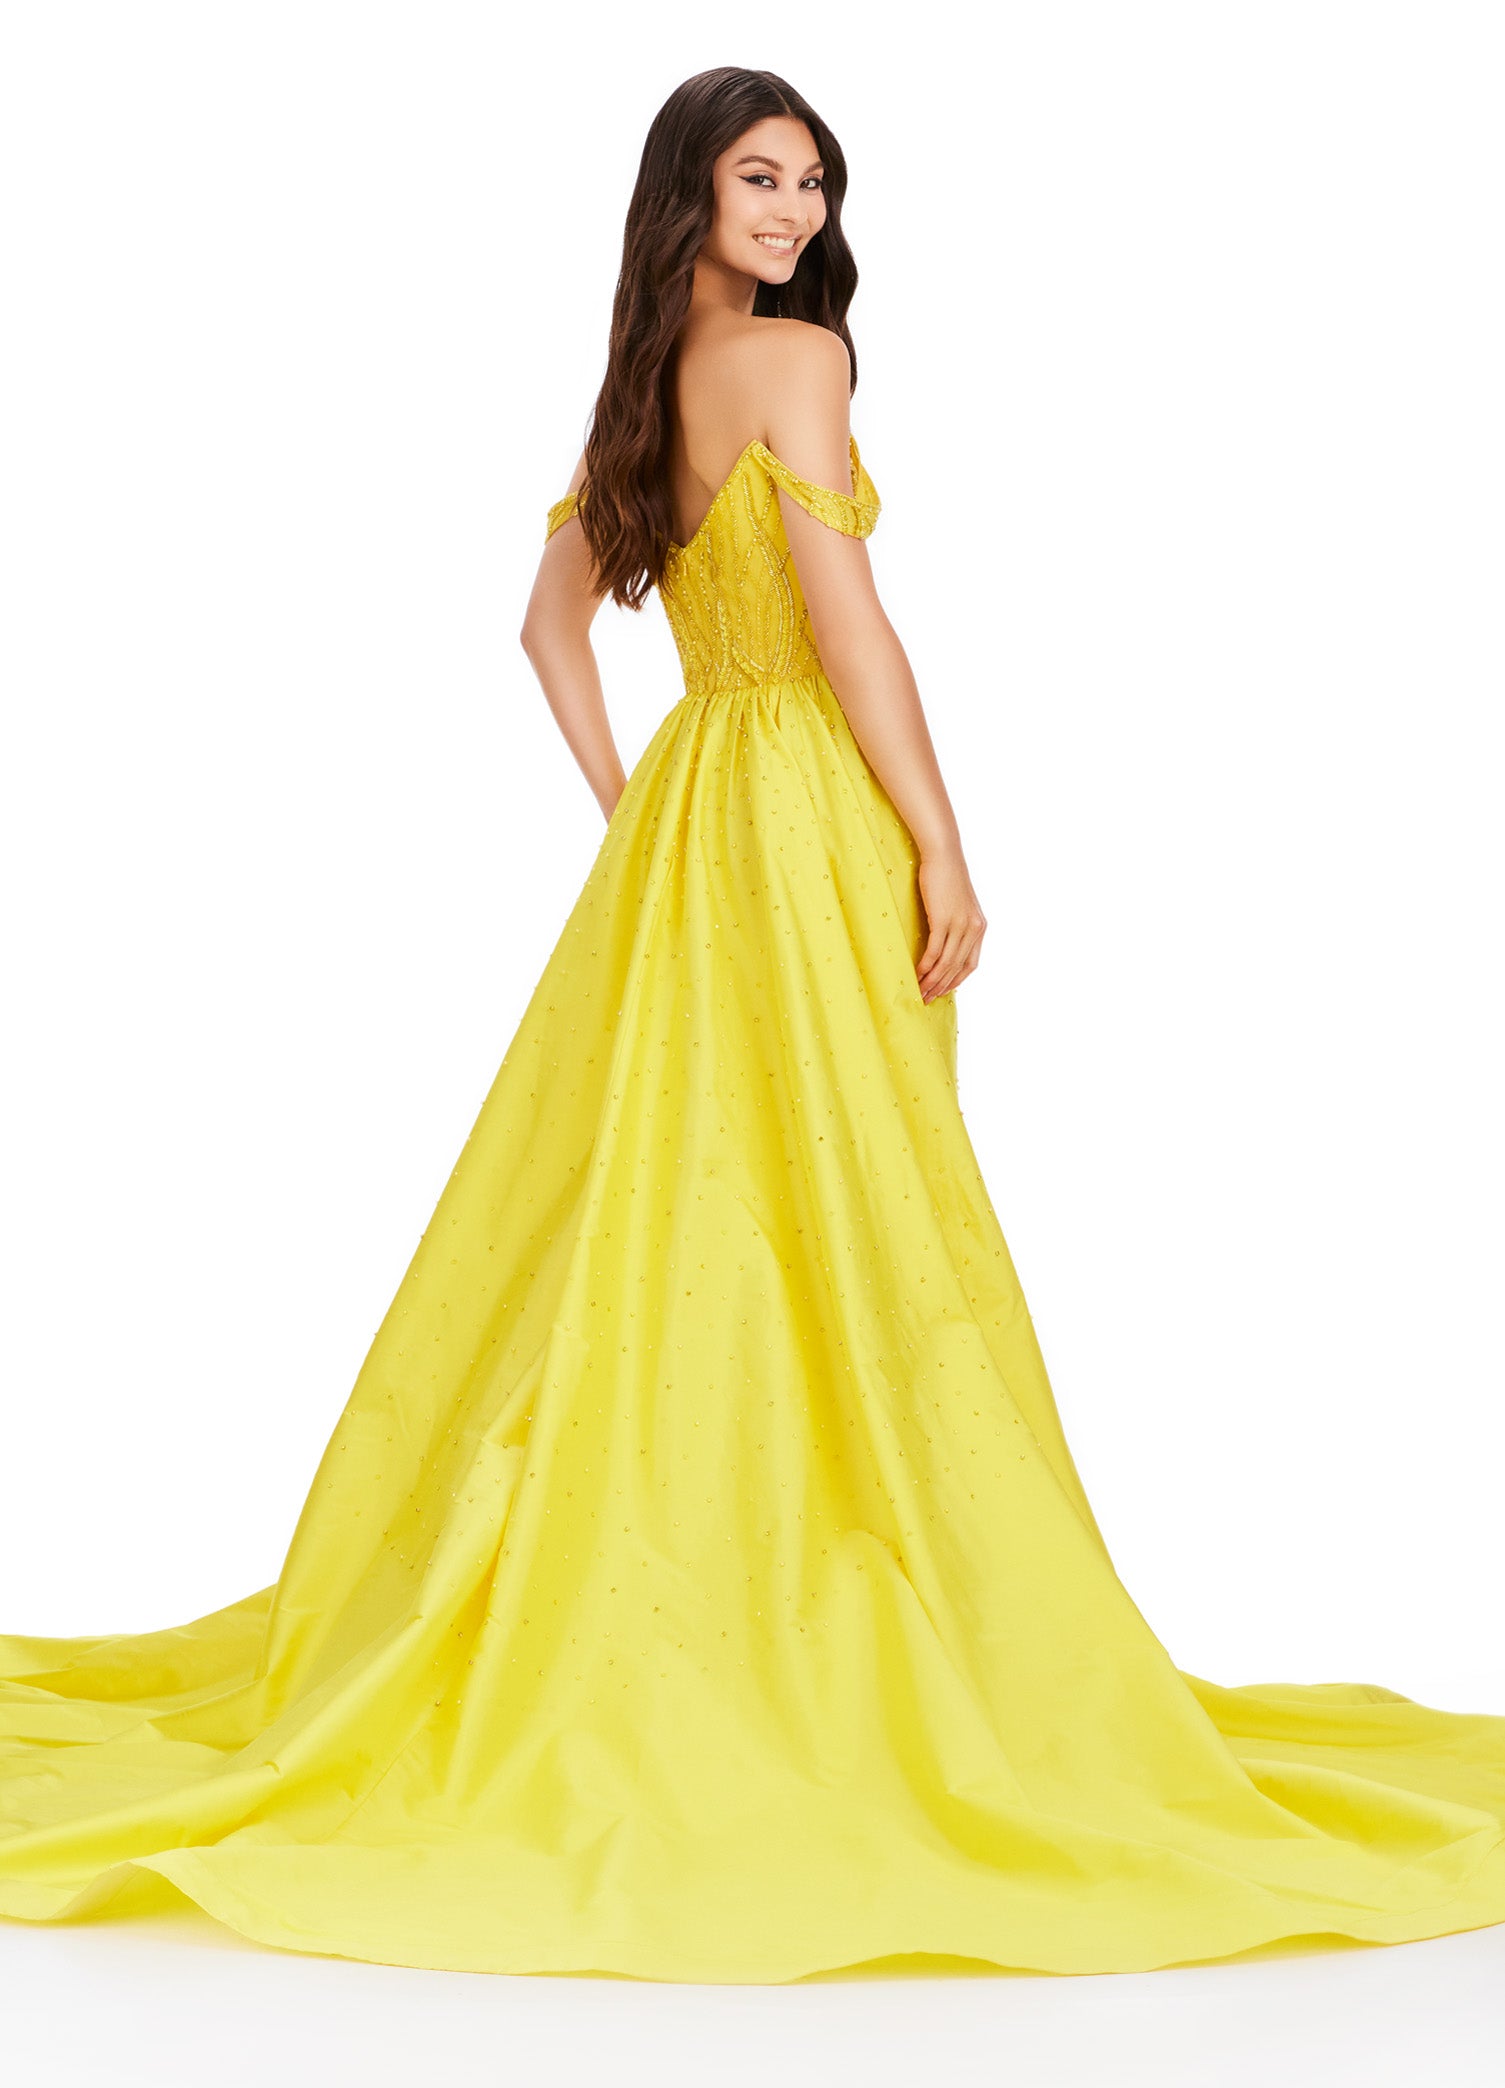 Elevate your evening look with the Ashley Lauren 11458 Long Prom Dress. This fully beaded strapless gown features a flattering off shoulder neckline and a unique draping taffeta overskirt. Perfect for formal occasions and pageants. Regal and fabulous? We got you. This fully beaded gown features an off shoulder sweetheart neckline and a dramatic taffeta overskirt to help you slay at your next event.